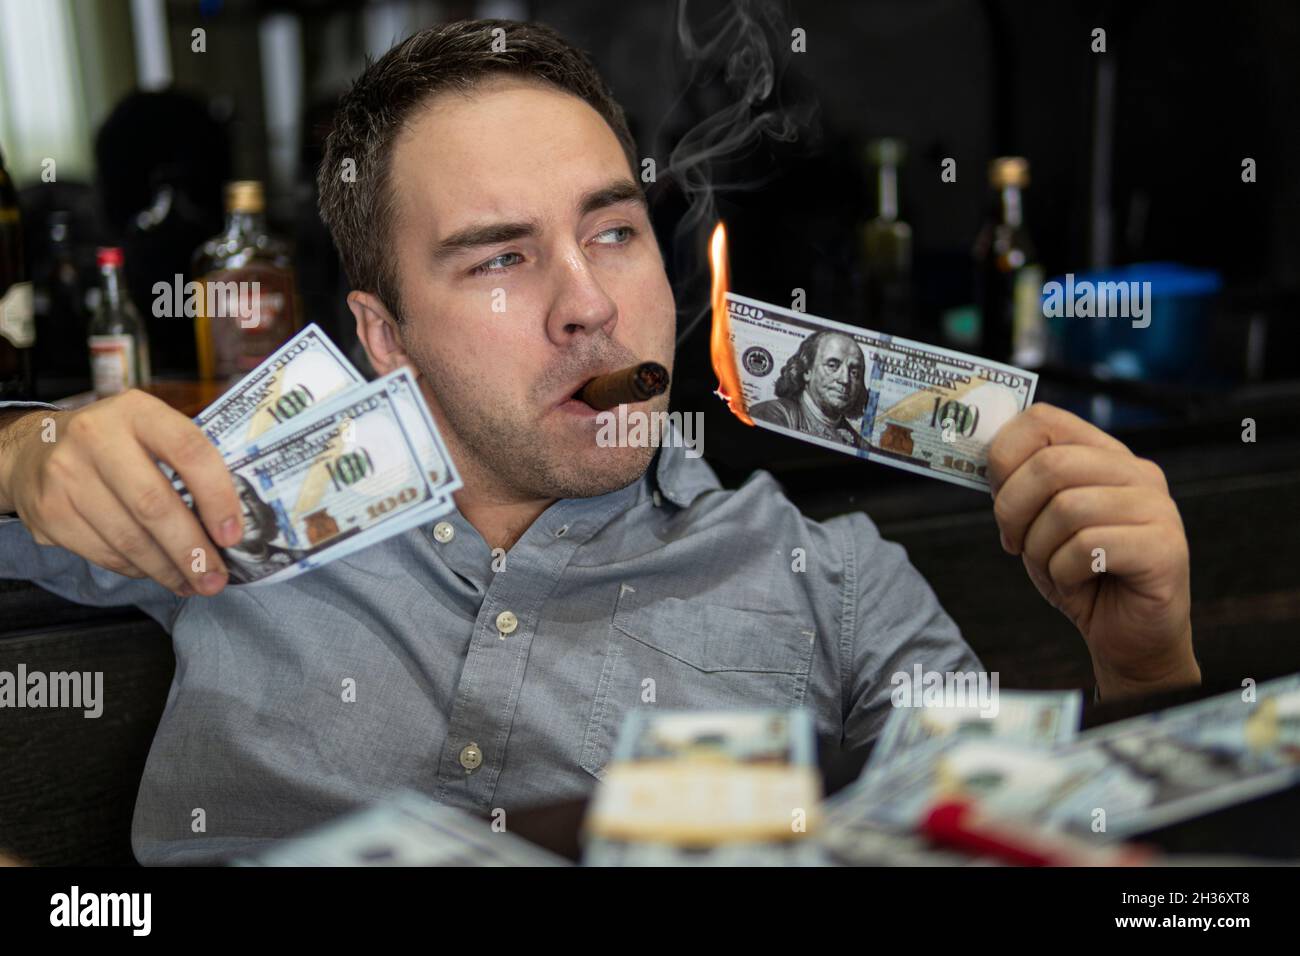 Man lighting his cigar with 100 dollars banknote against the background of bottles in the bar. concept of wealth and extravagance. Stock Photo